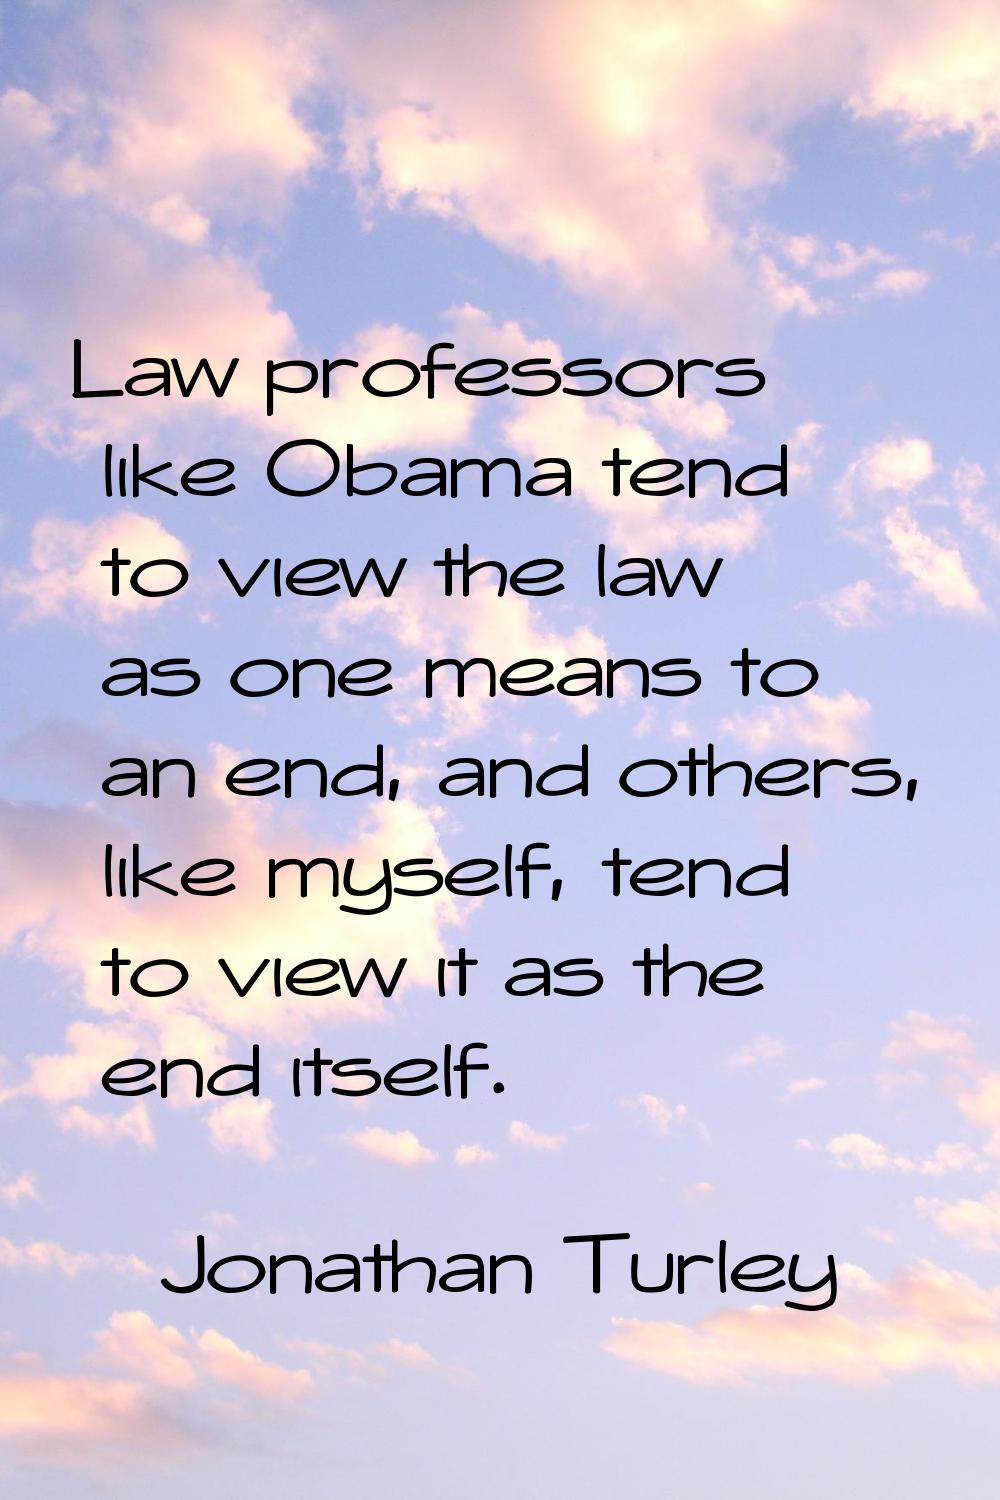 Law professors like Obama tend to view the law as one means to an end, and others, like myself, ten